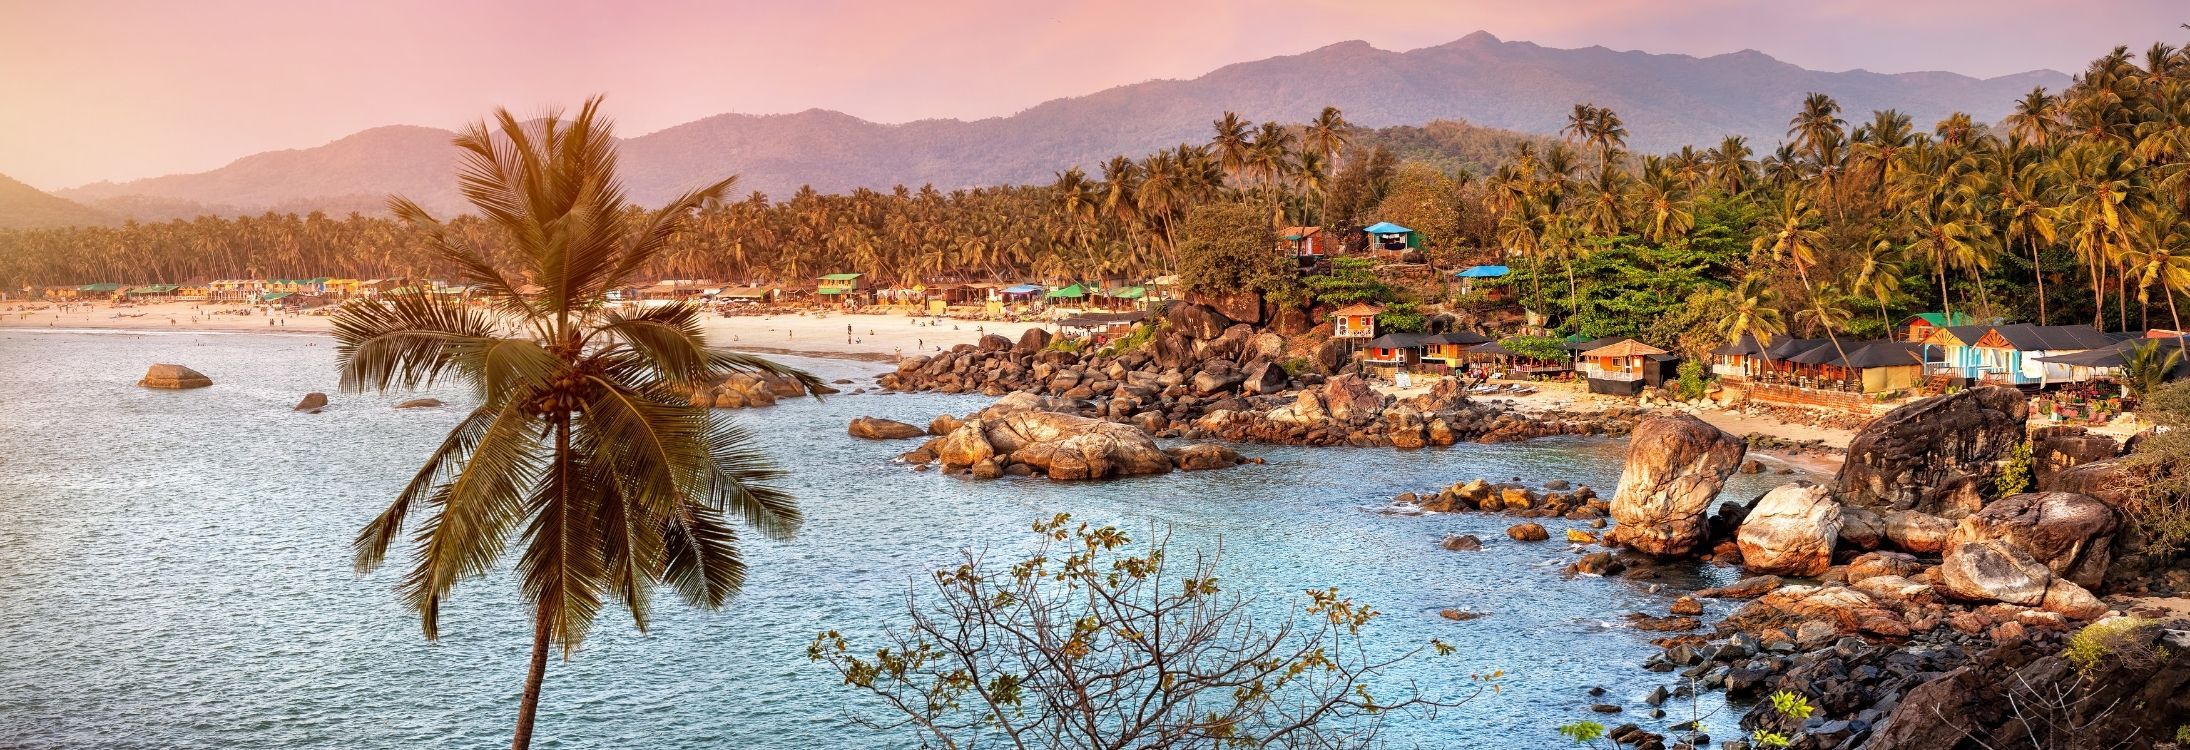 15 off beat things to do in Goa!